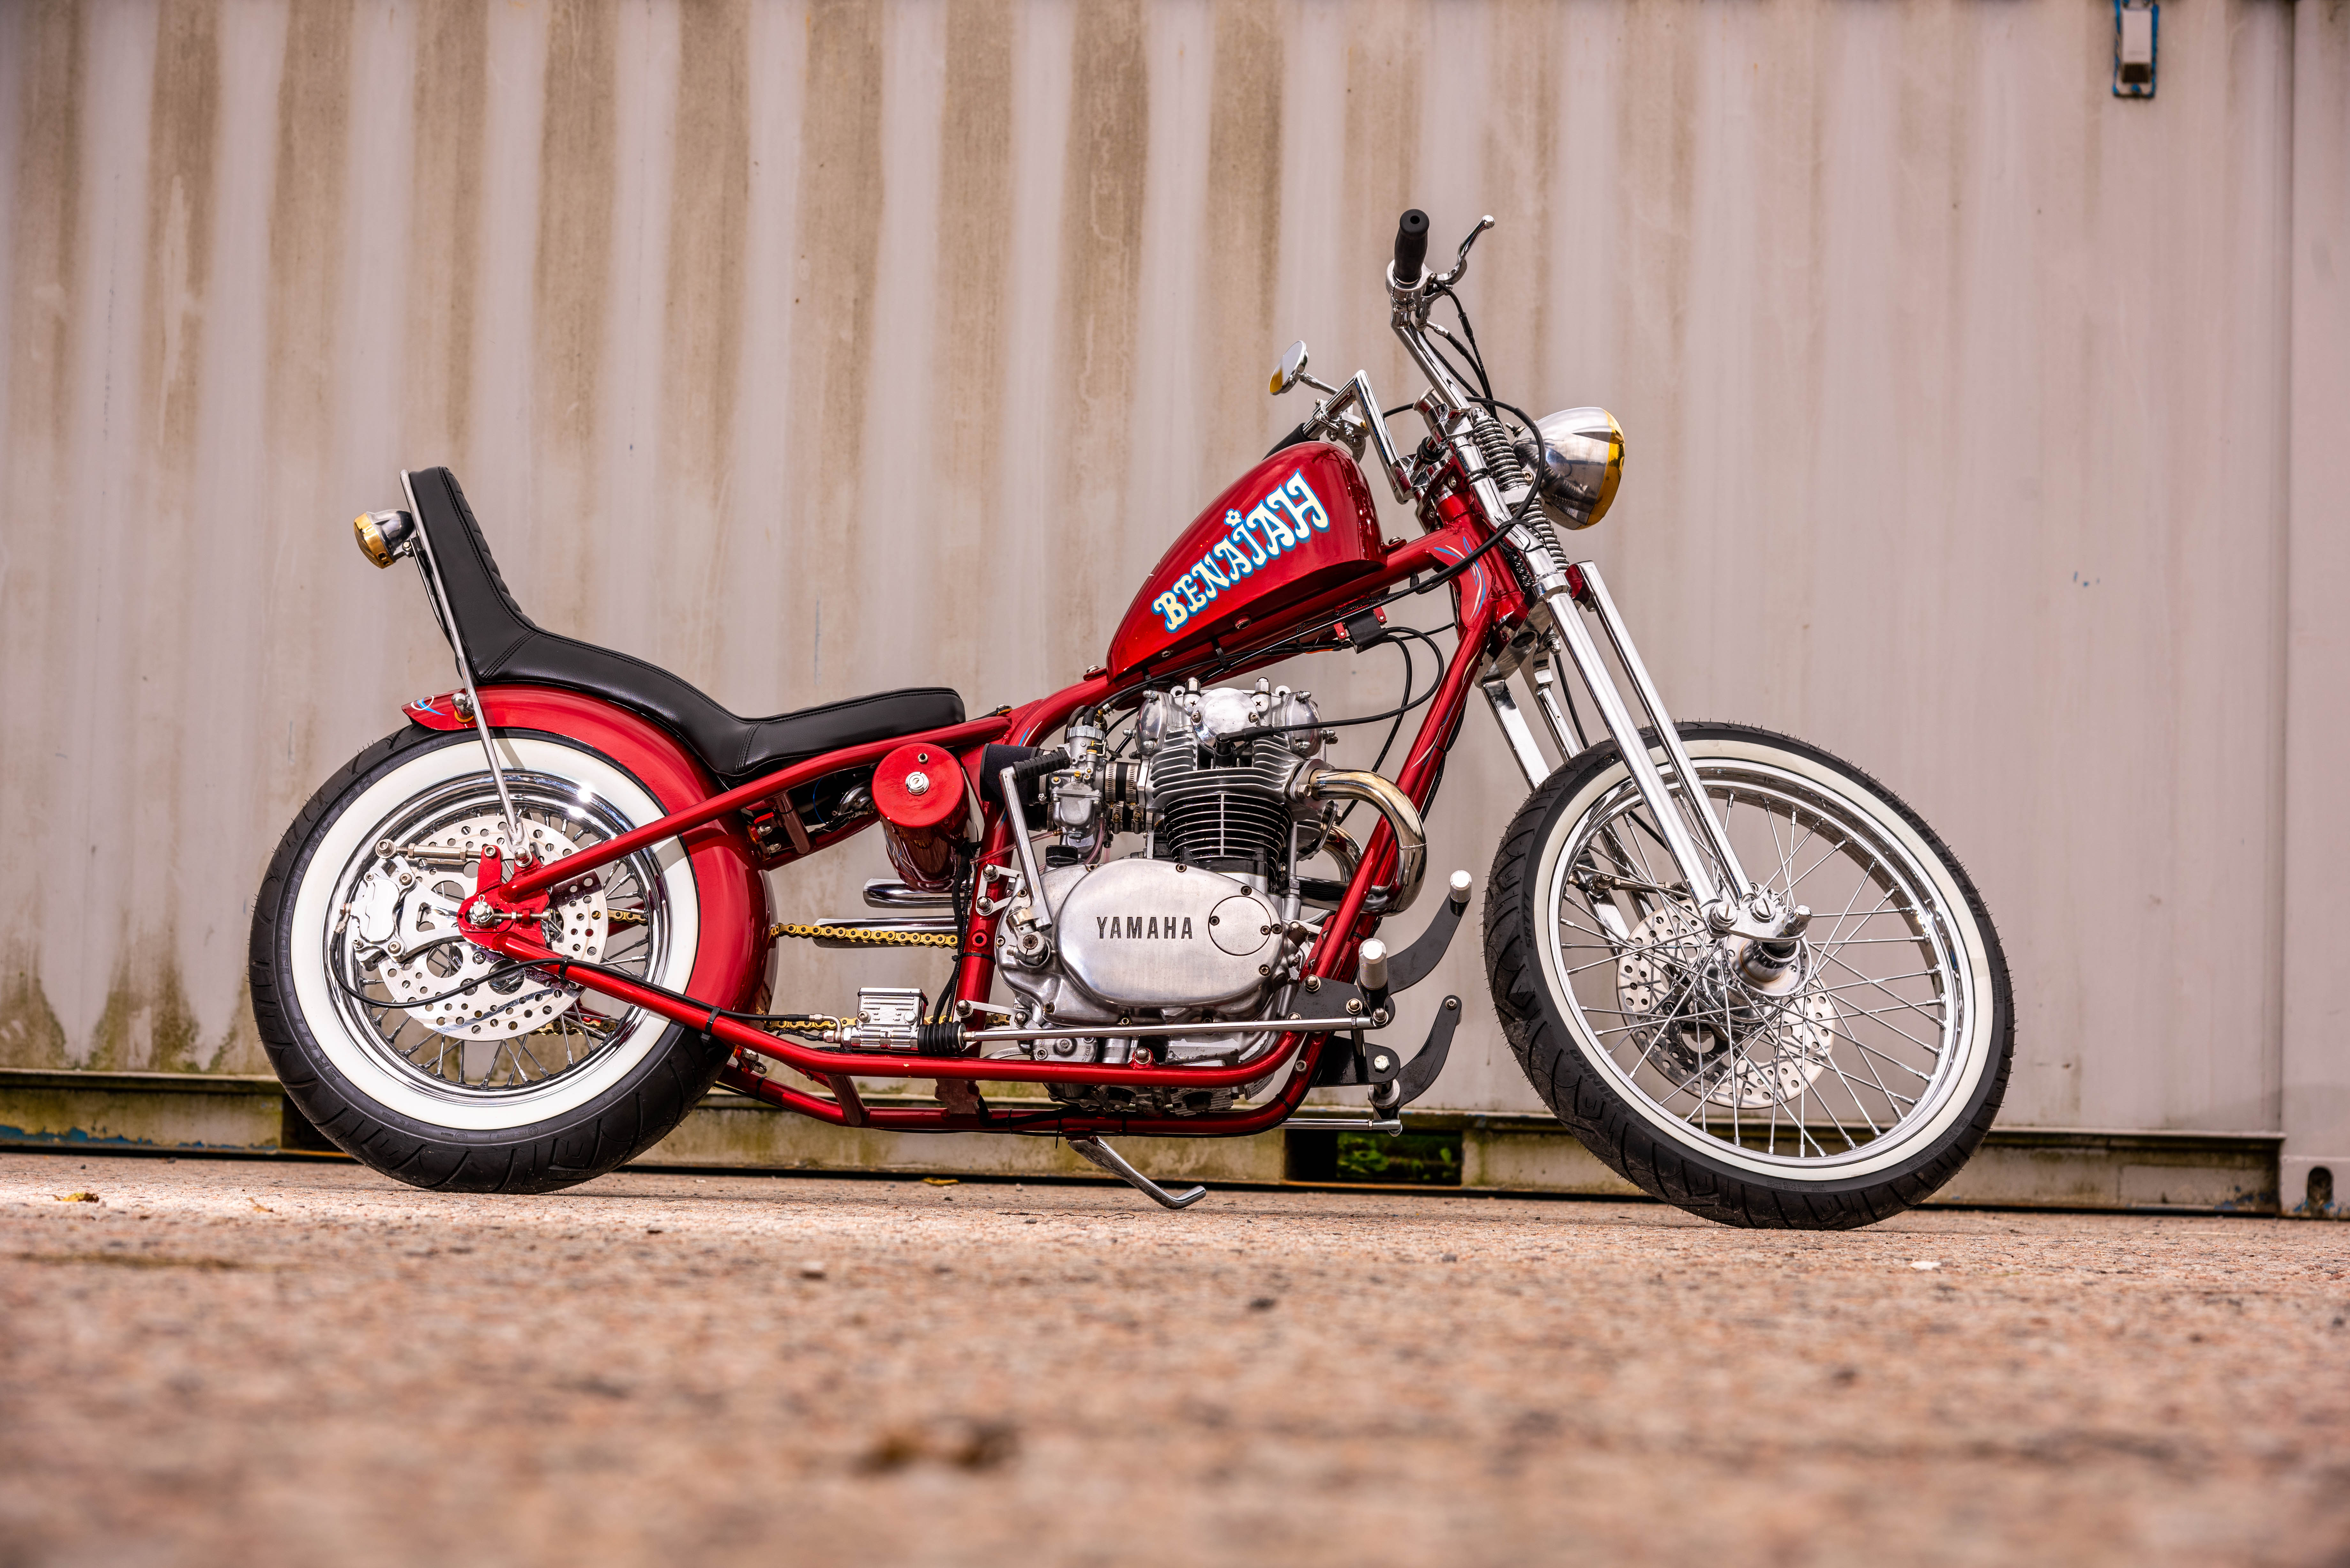 Gordon Cruden built this Yamaha XS 650 as one of the prizes for a north-east addiction charity prize draw